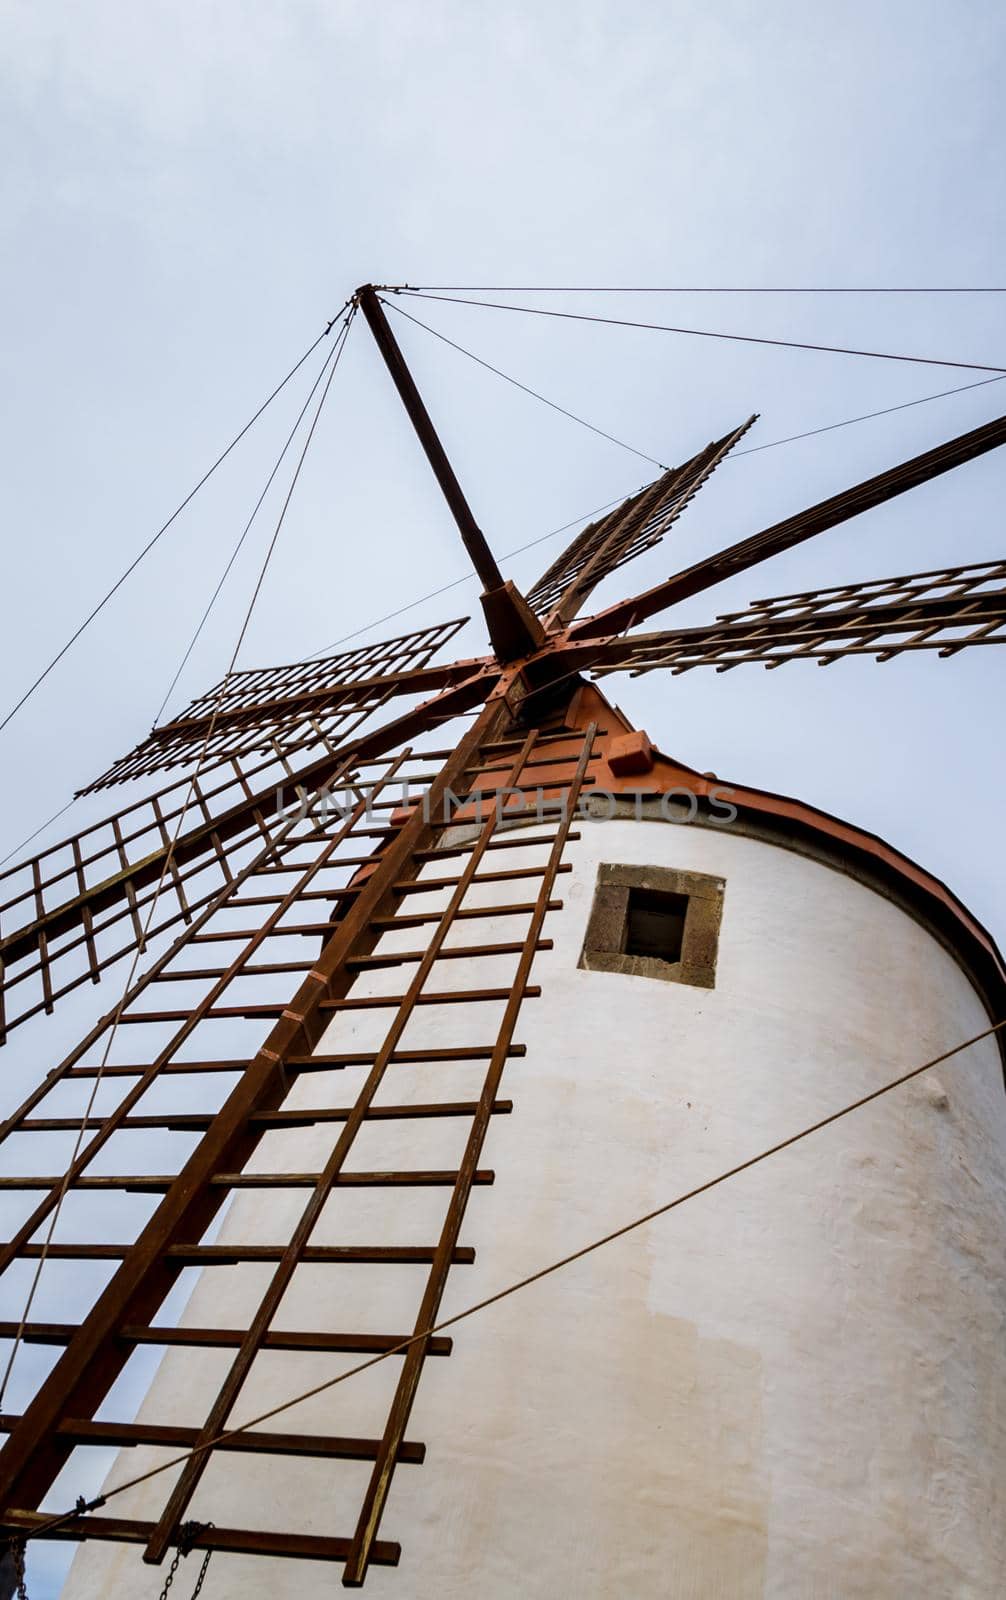 Low-angle view of an old white windmill with wood blades